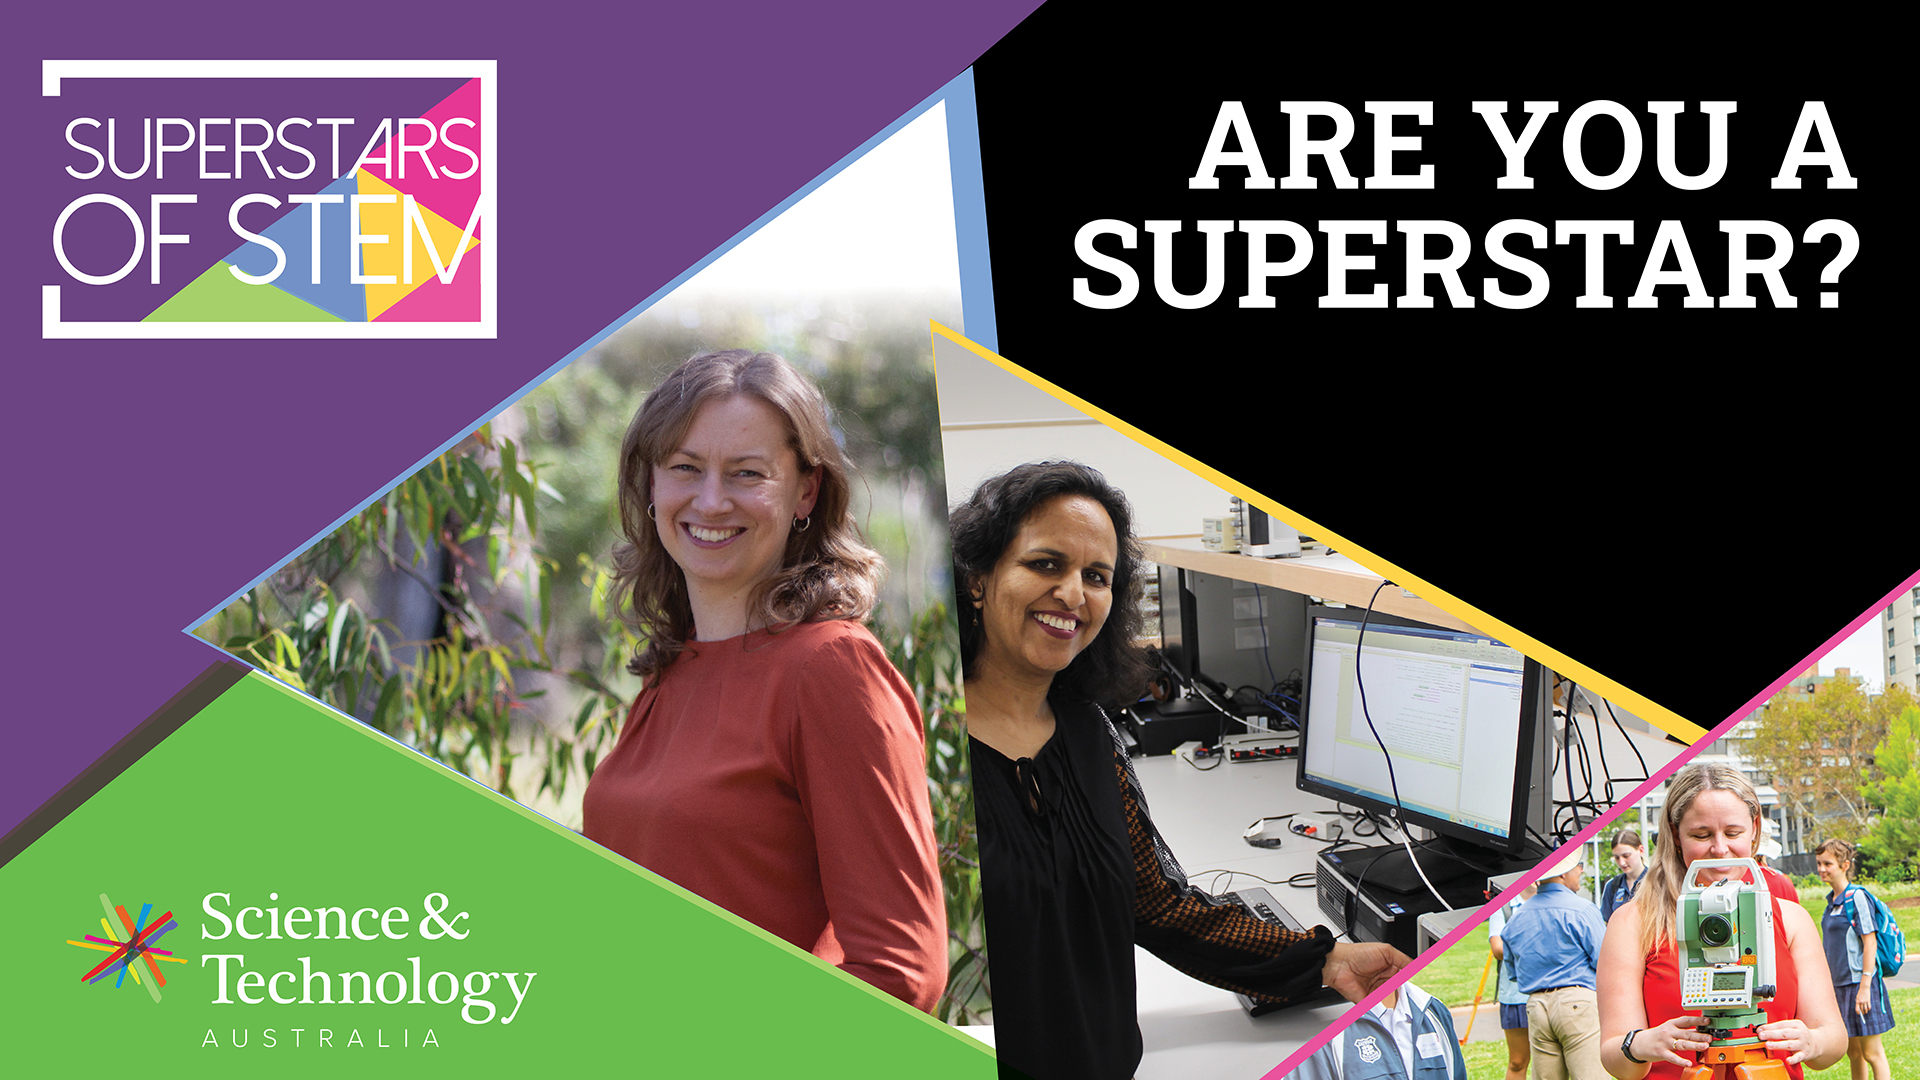 Image asks 'Are you a Superstar?' and shows three scientists who are current Superstars of STEM and the STA and Superstars logo.